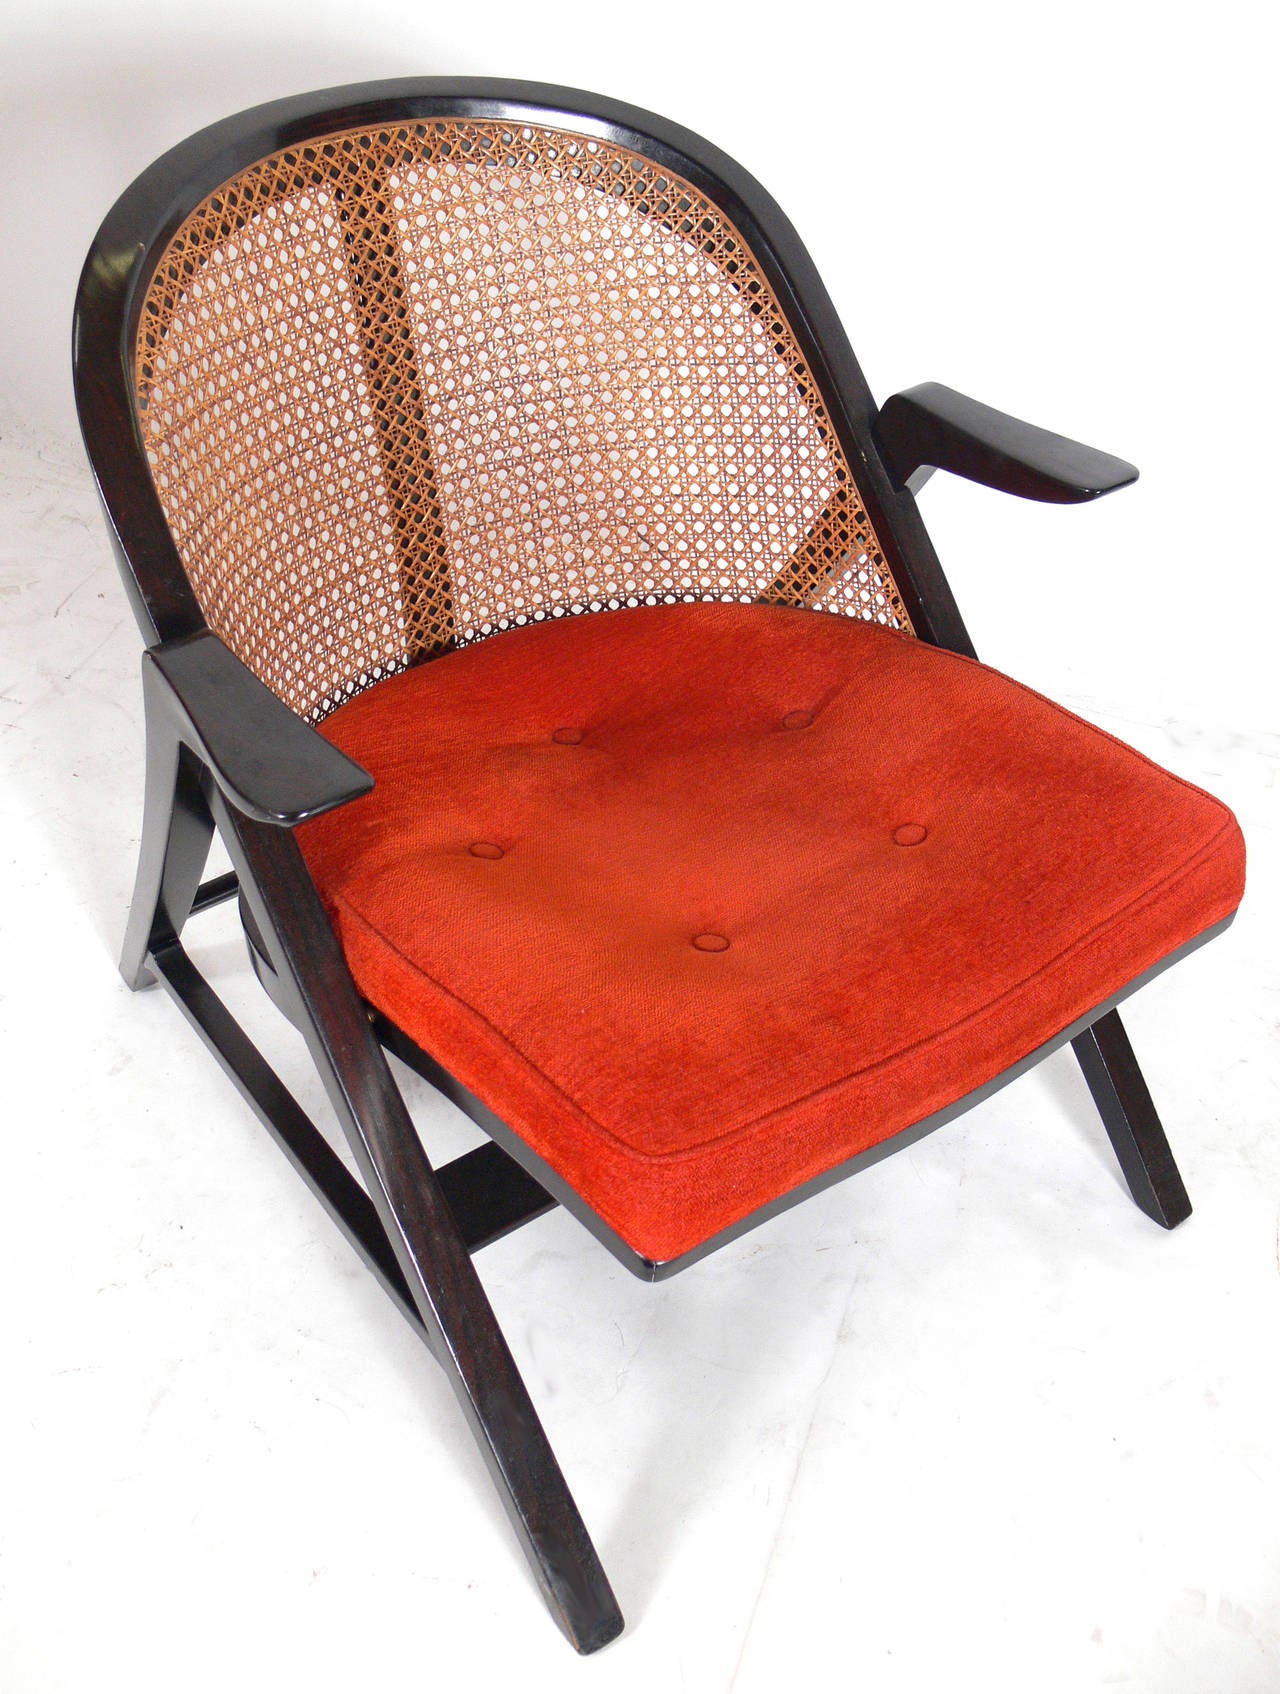 Mahogany Pair of Curvaceous Lounge Chairs by Edward Wormley for Dunbar